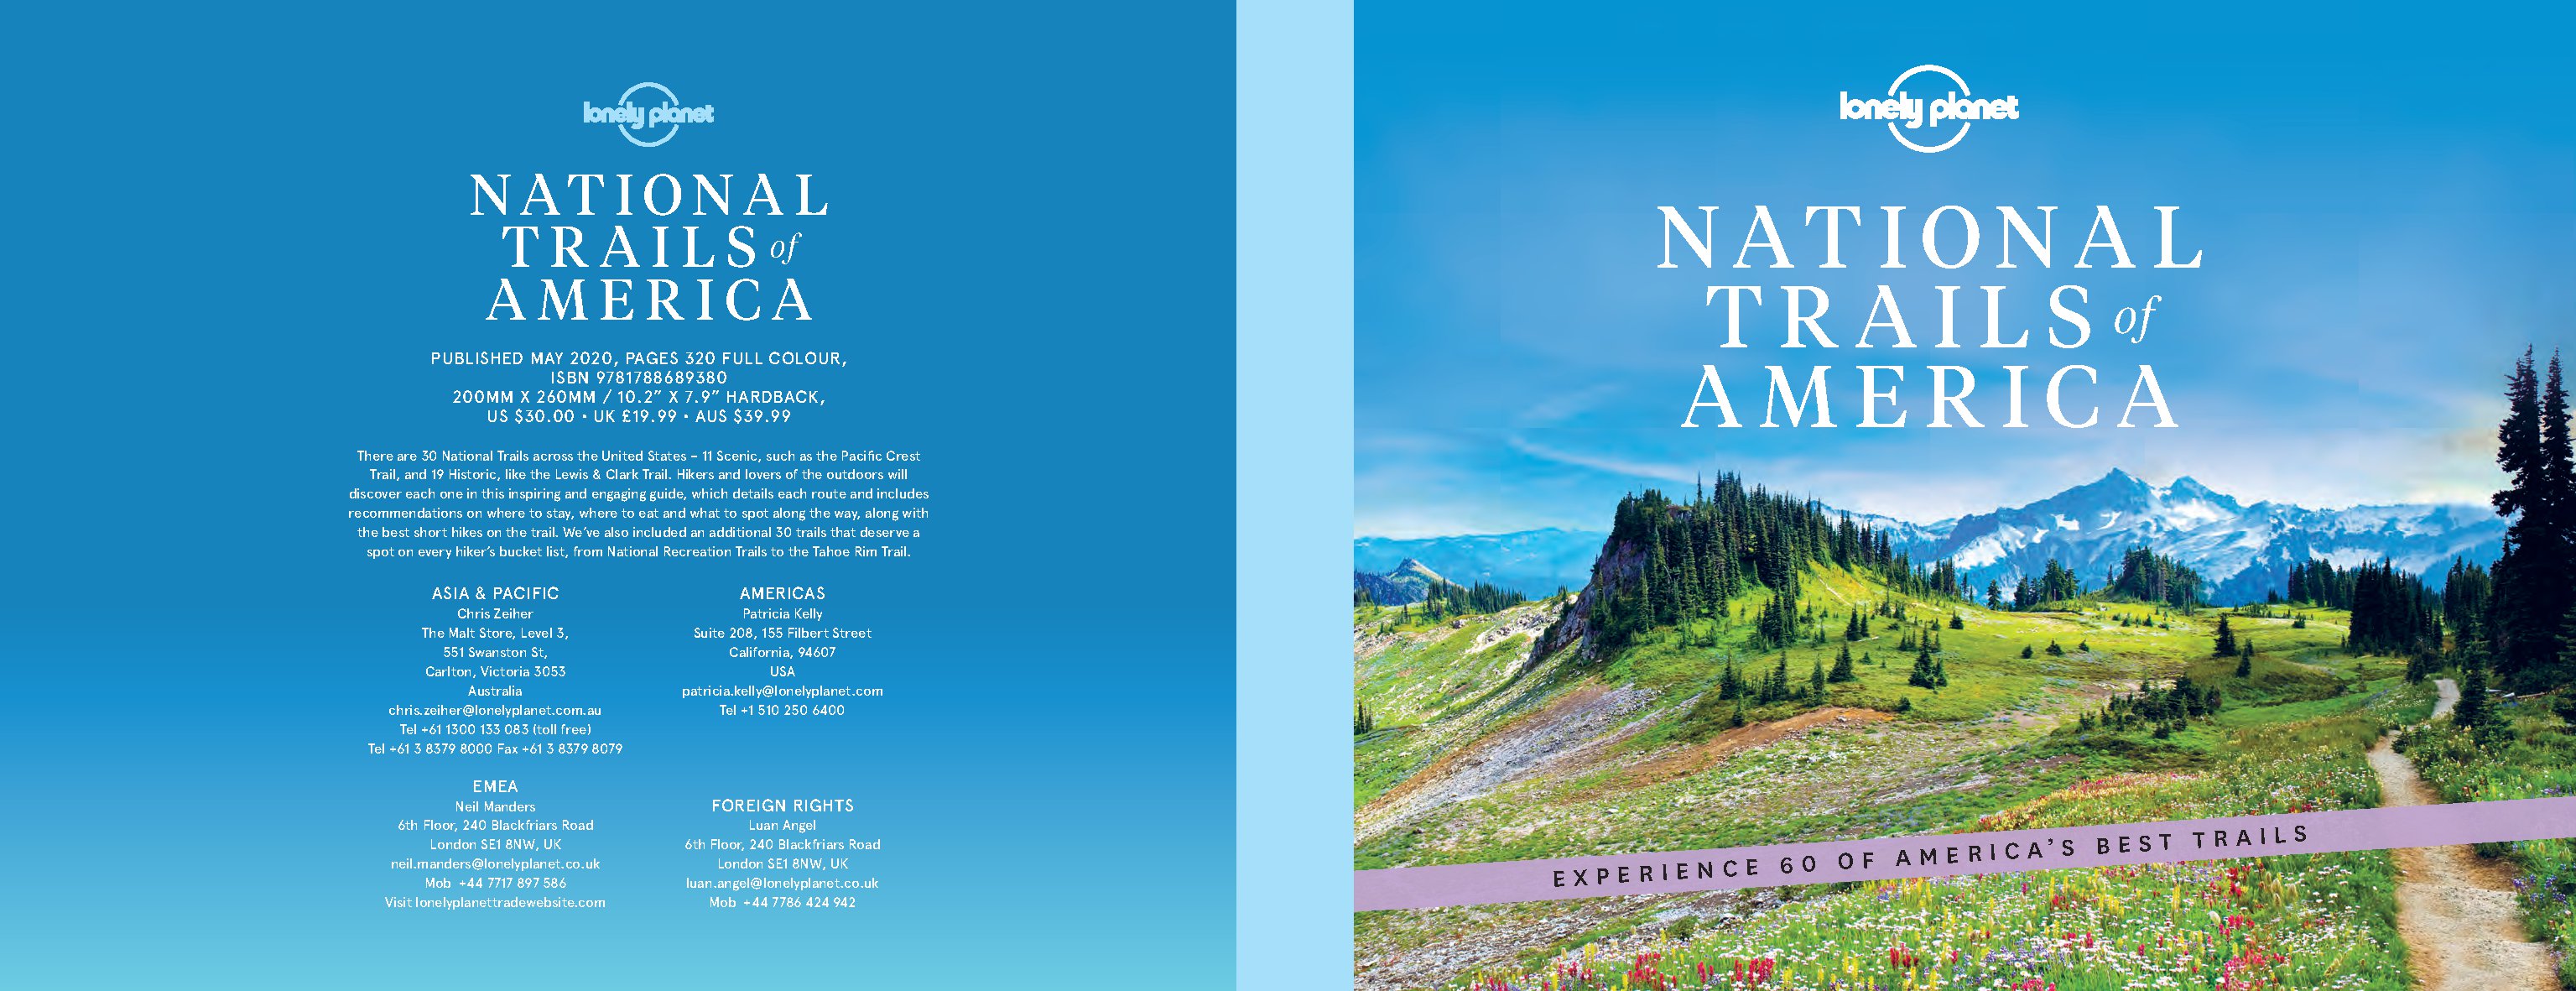 National Trails of America 1